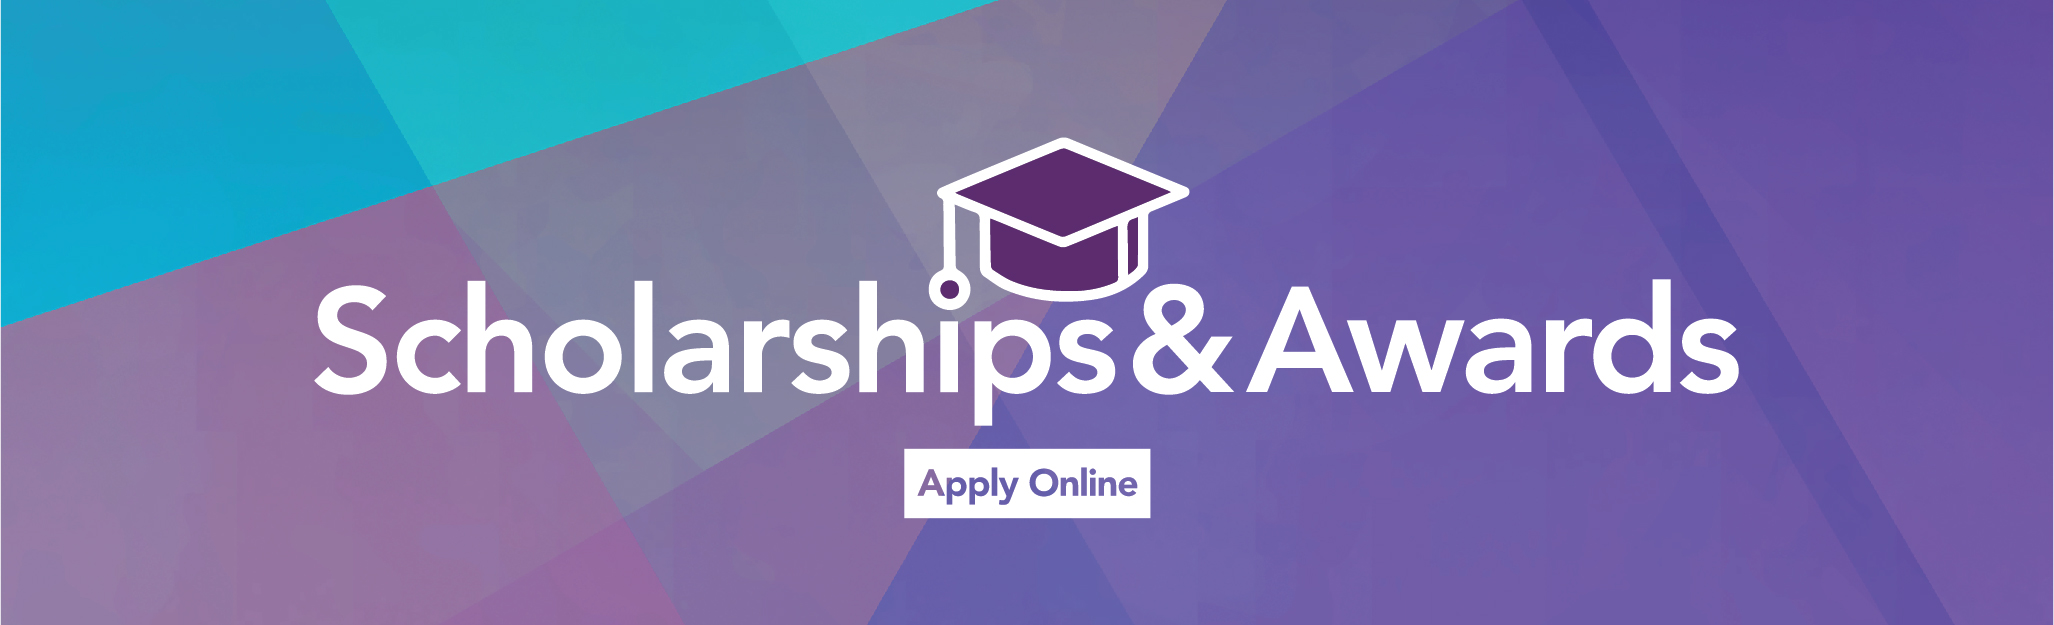 Scholarships and Awards Application - banner